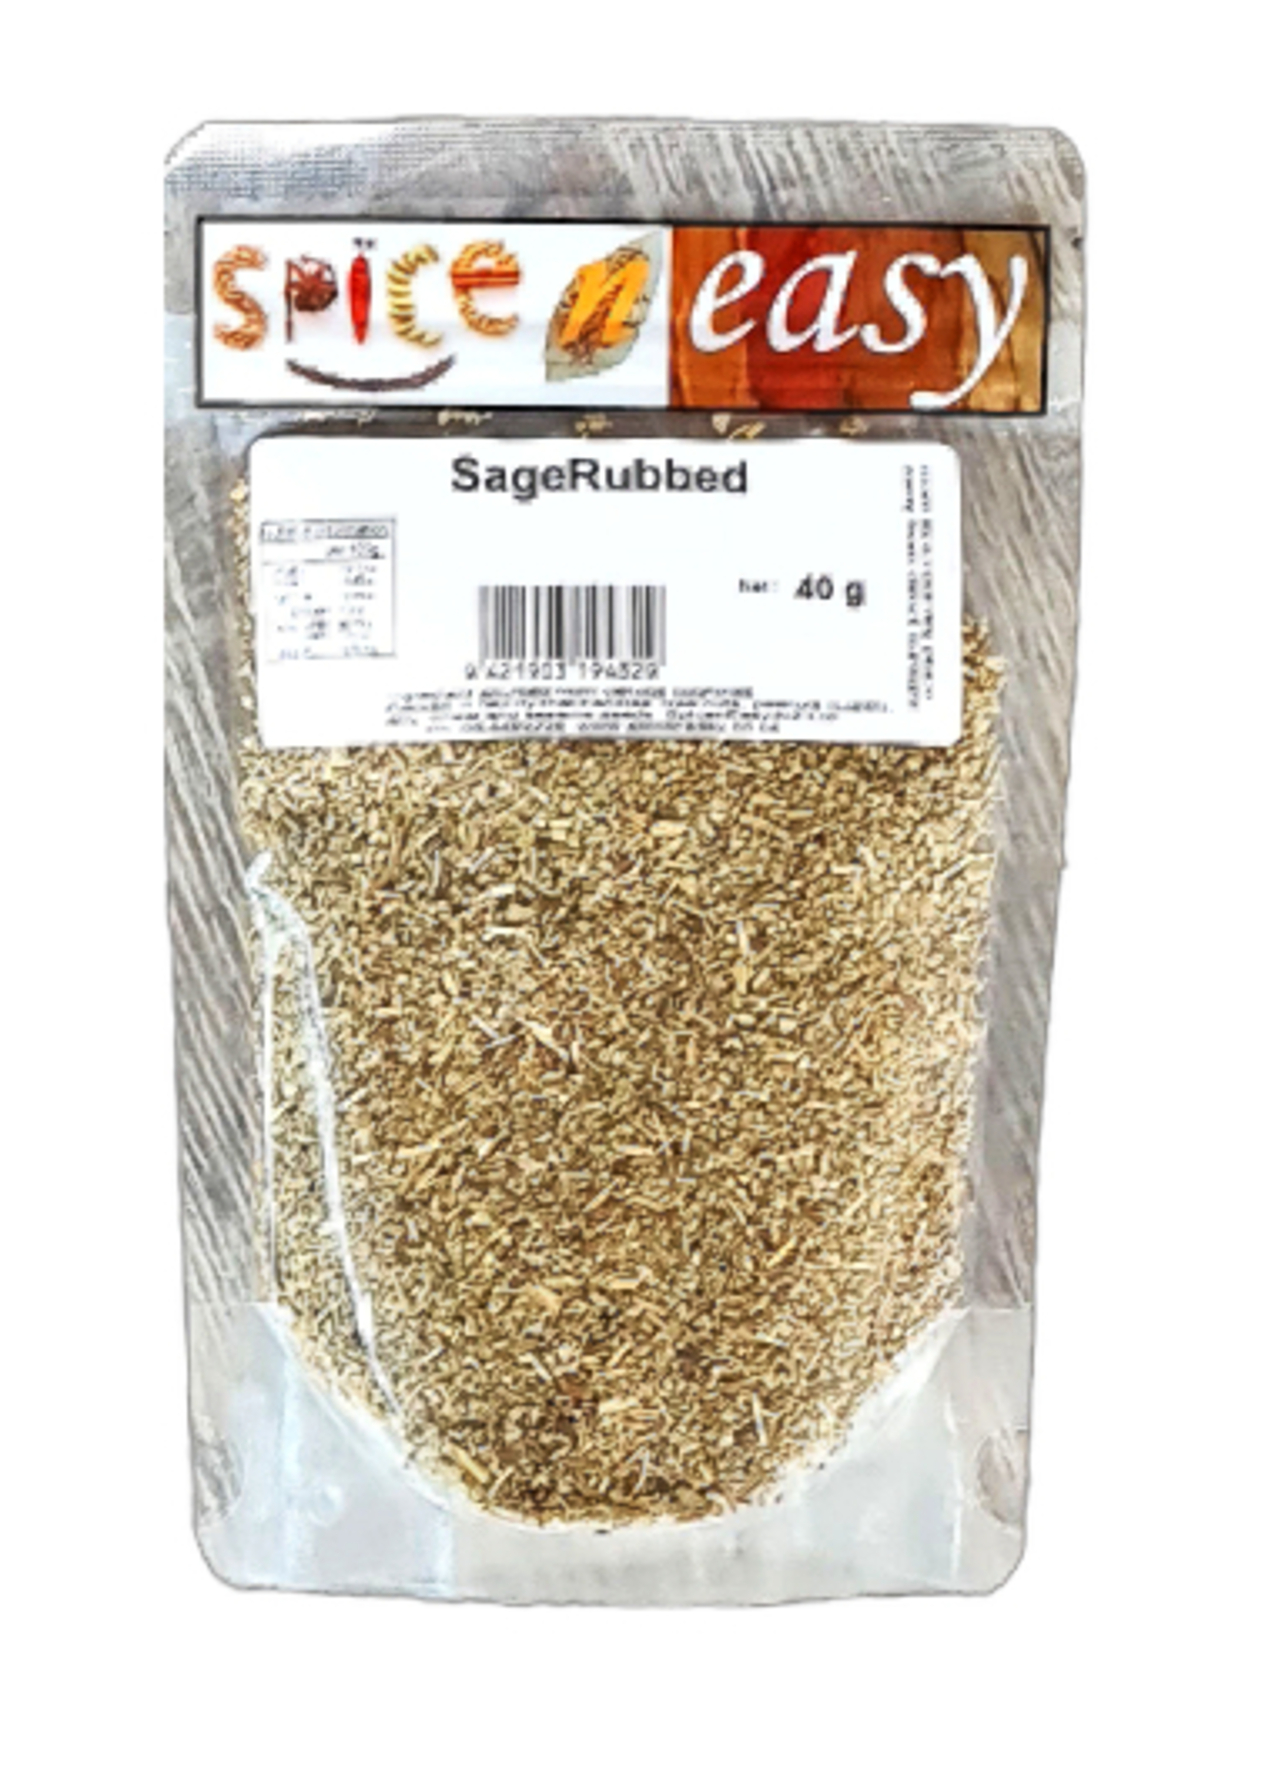 Sage rubbed 40g